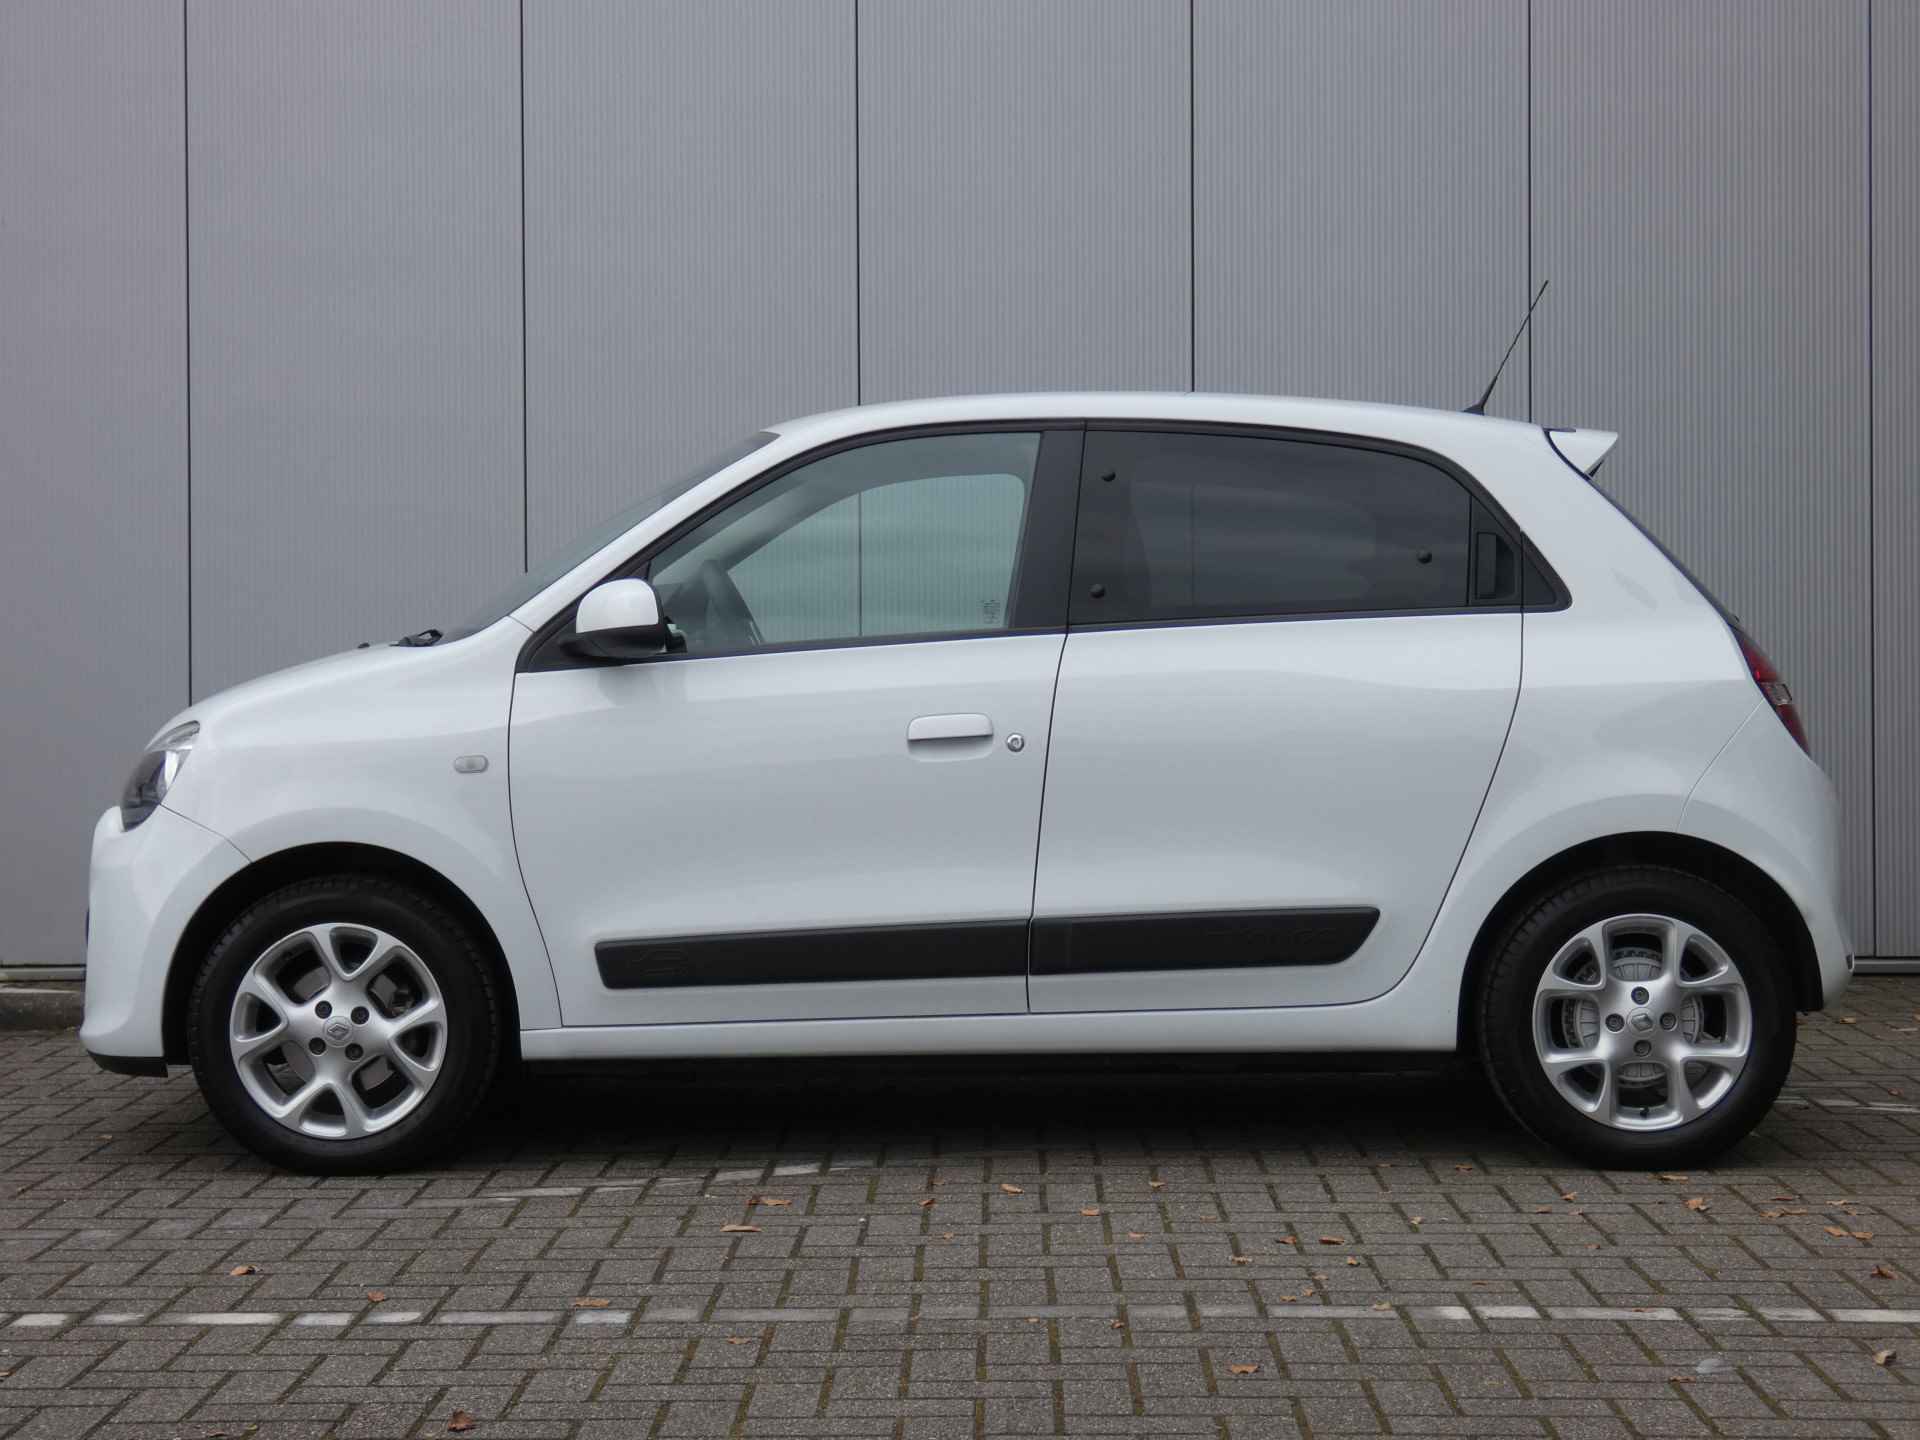 Renault Twingo 0.9 TCe | Cruise Contol | Airco | Bluetooth | Lane assist - 20/57